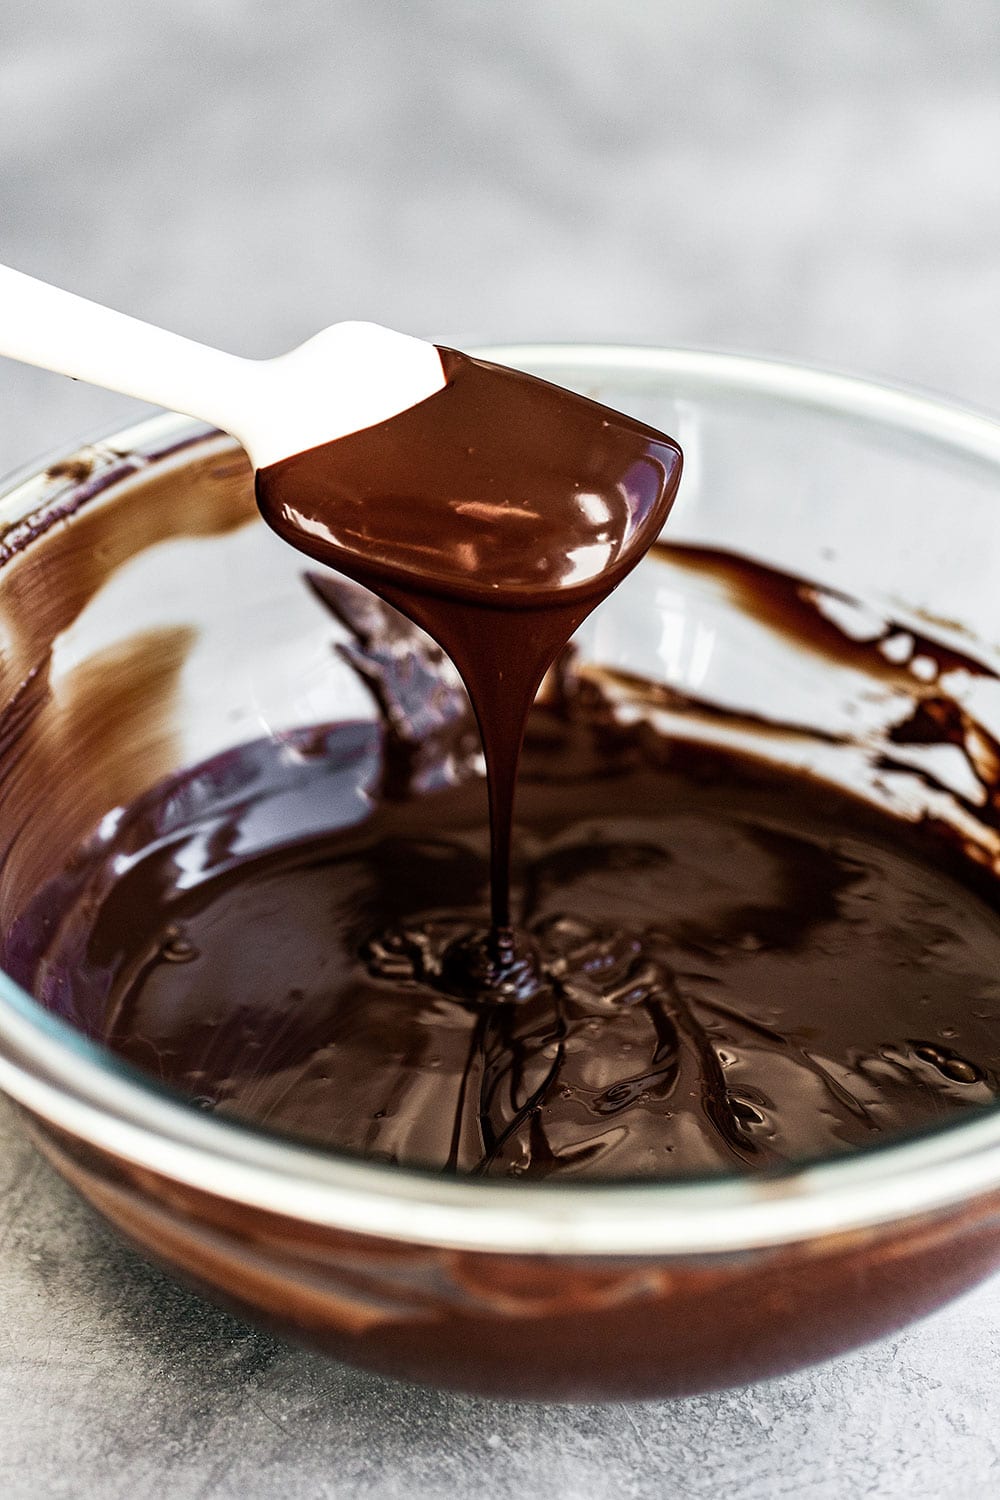 Melted chocolate in a bowl with a spatula